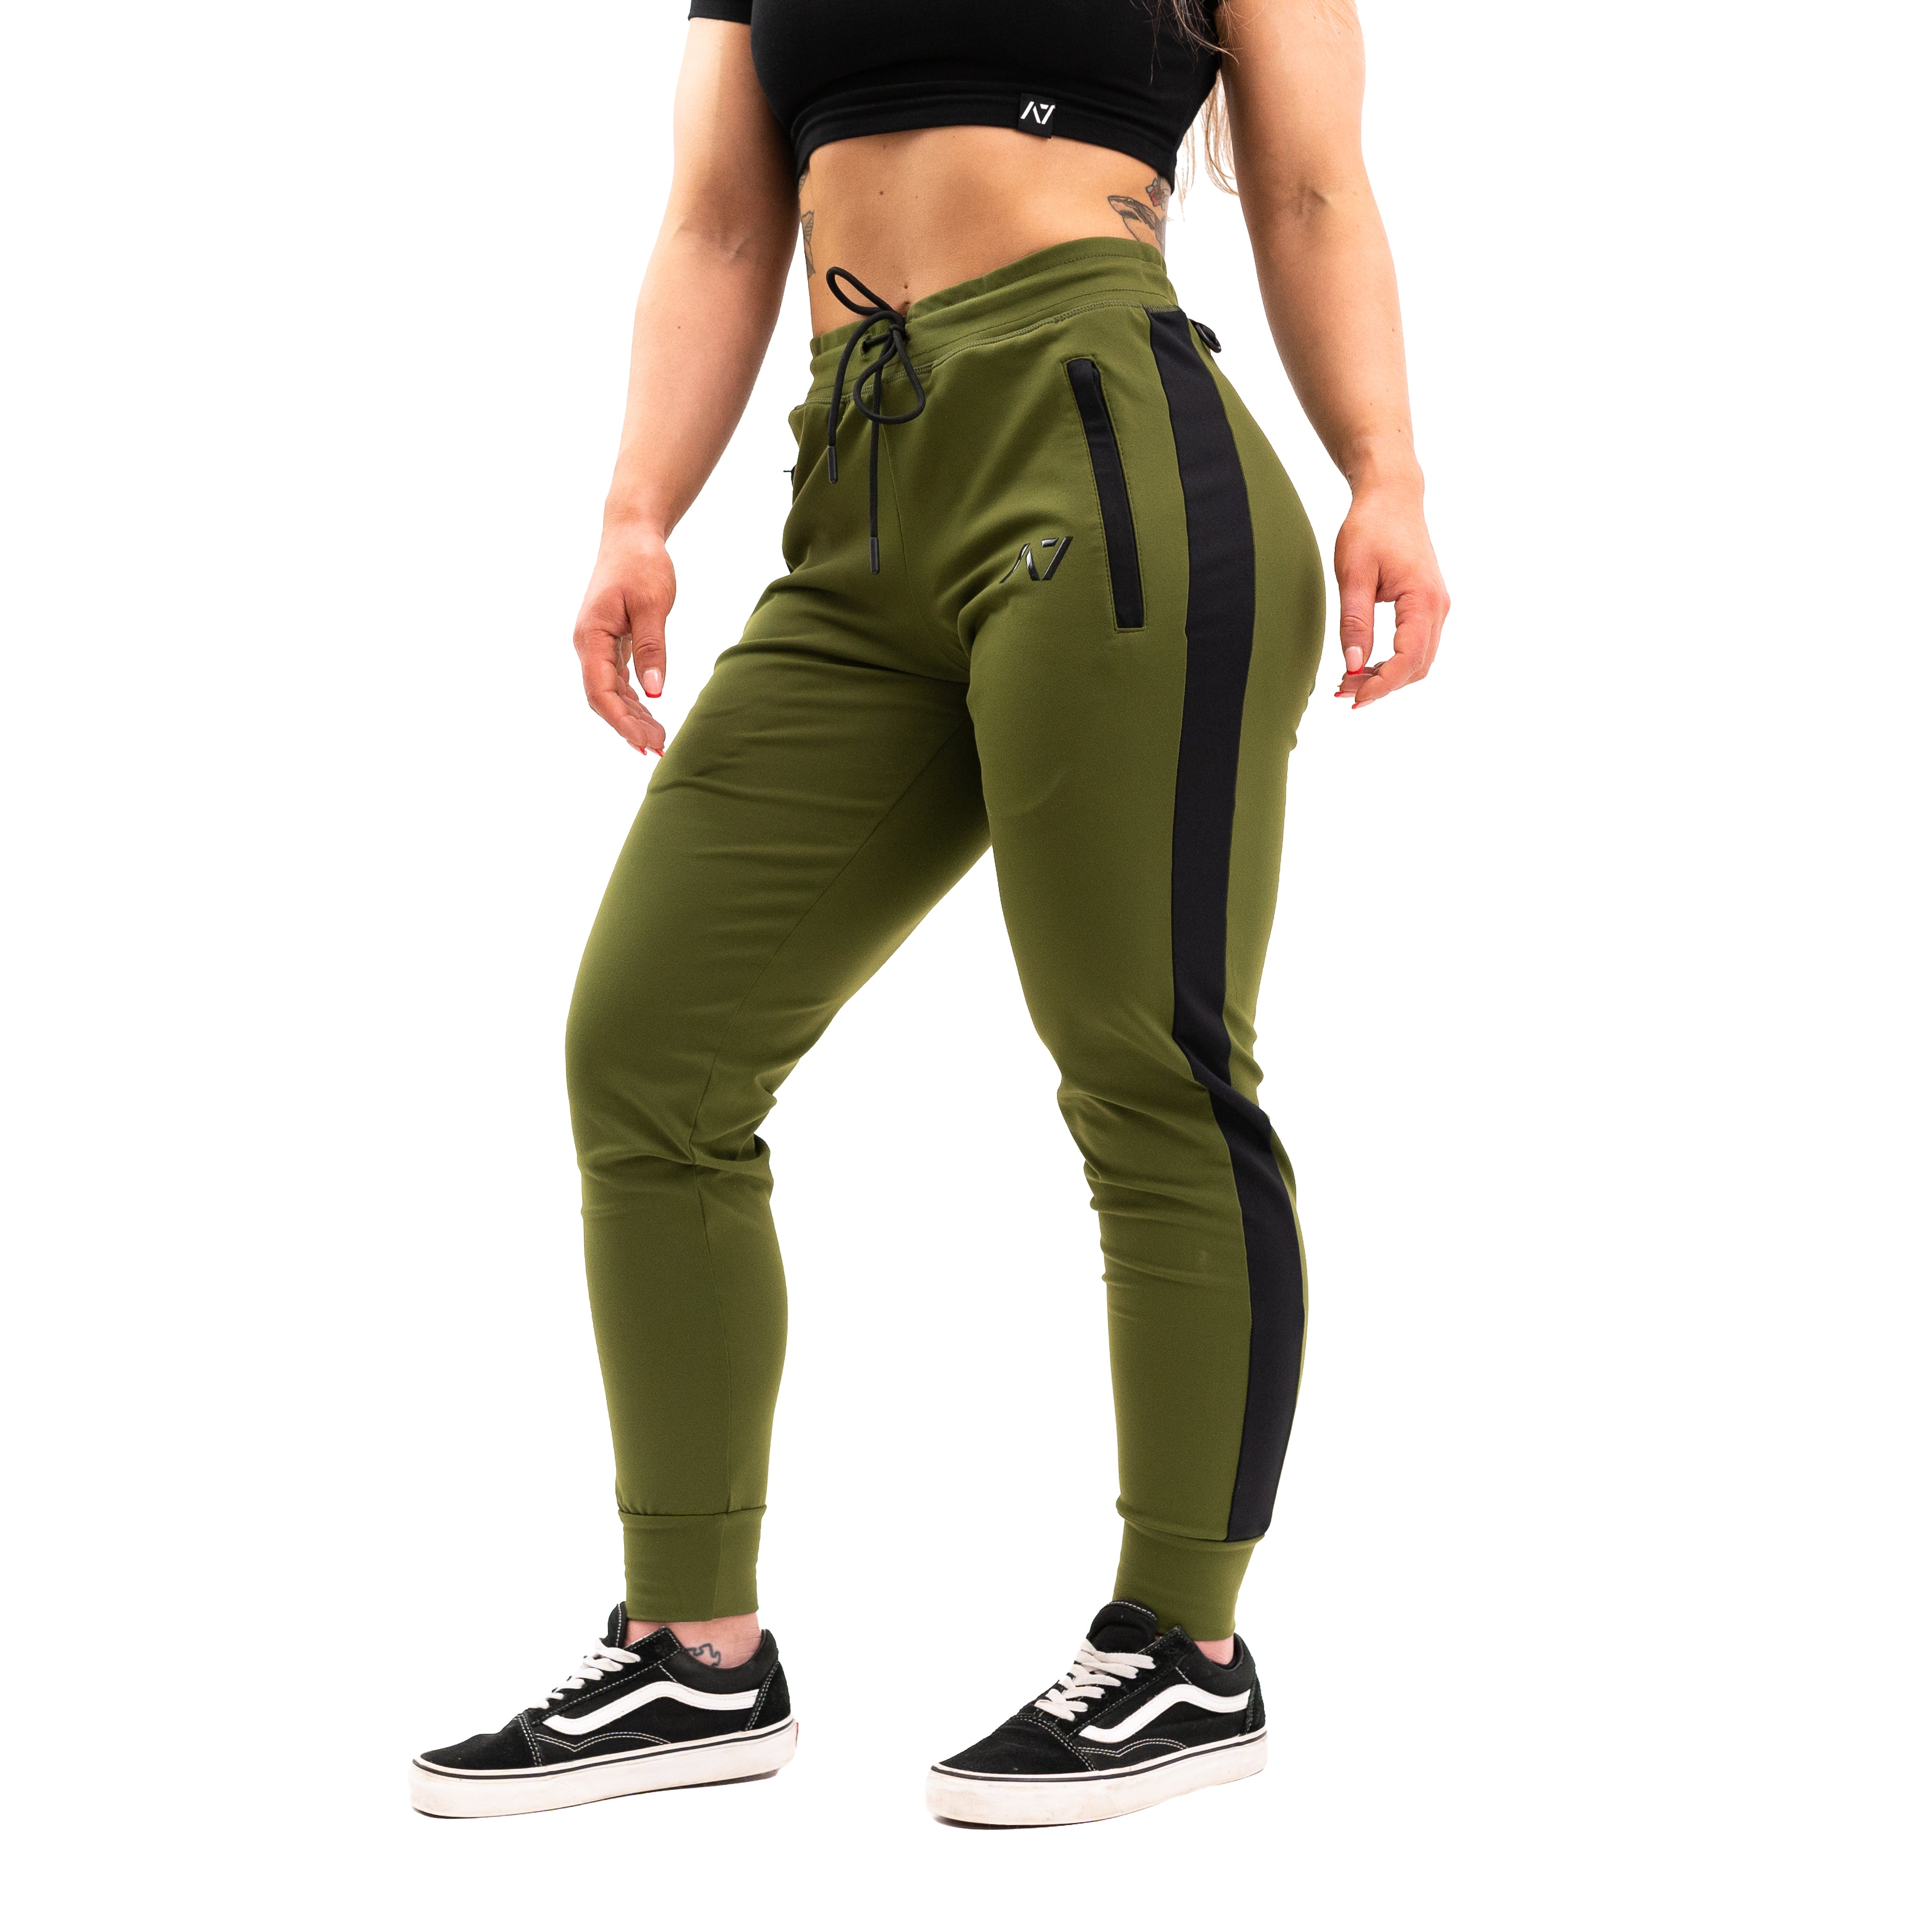 Military Defy joggers are just as comfortable in the gym as they are going out. These are made with premium moisture-wicking 4-way-stretch material for greater range of motion. These are a great fit for both men and women and offer deep zippered pockets and tapered leg design.